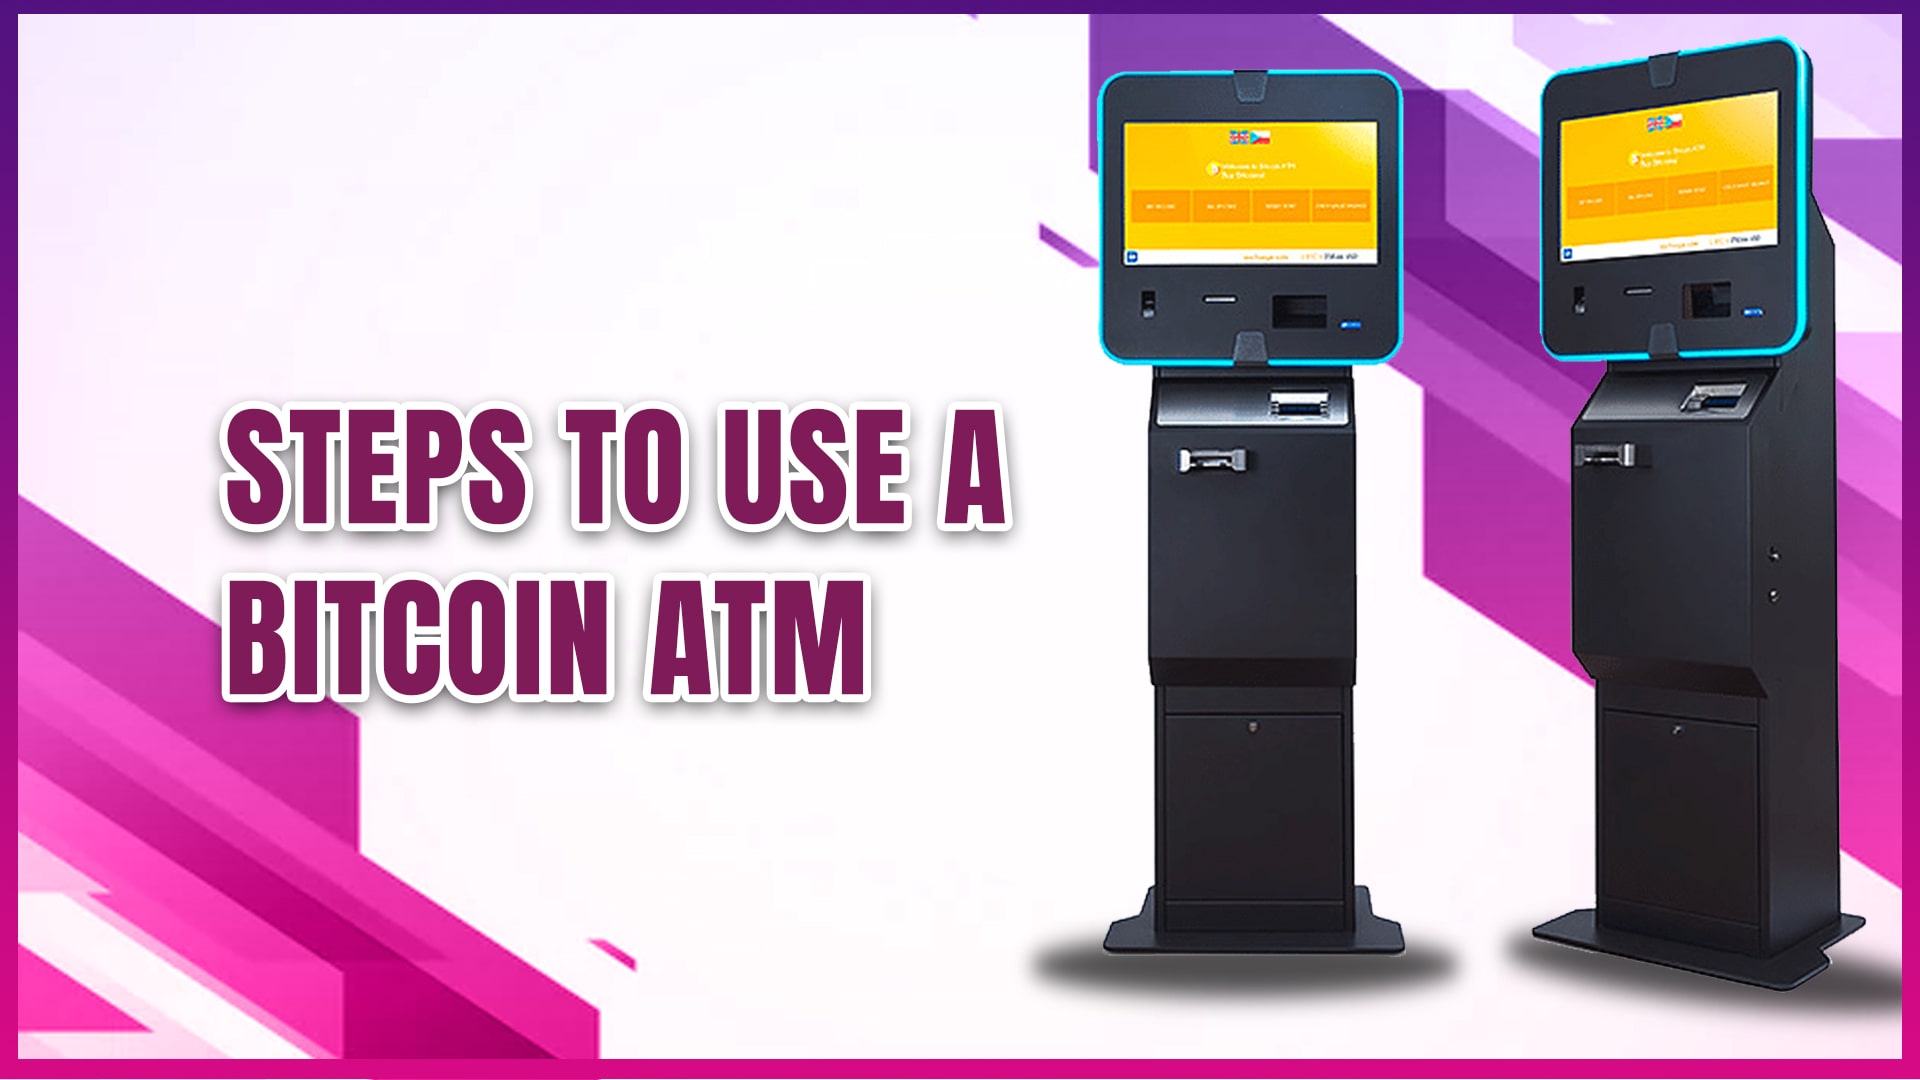 Steps to Use Bitcoin ATM